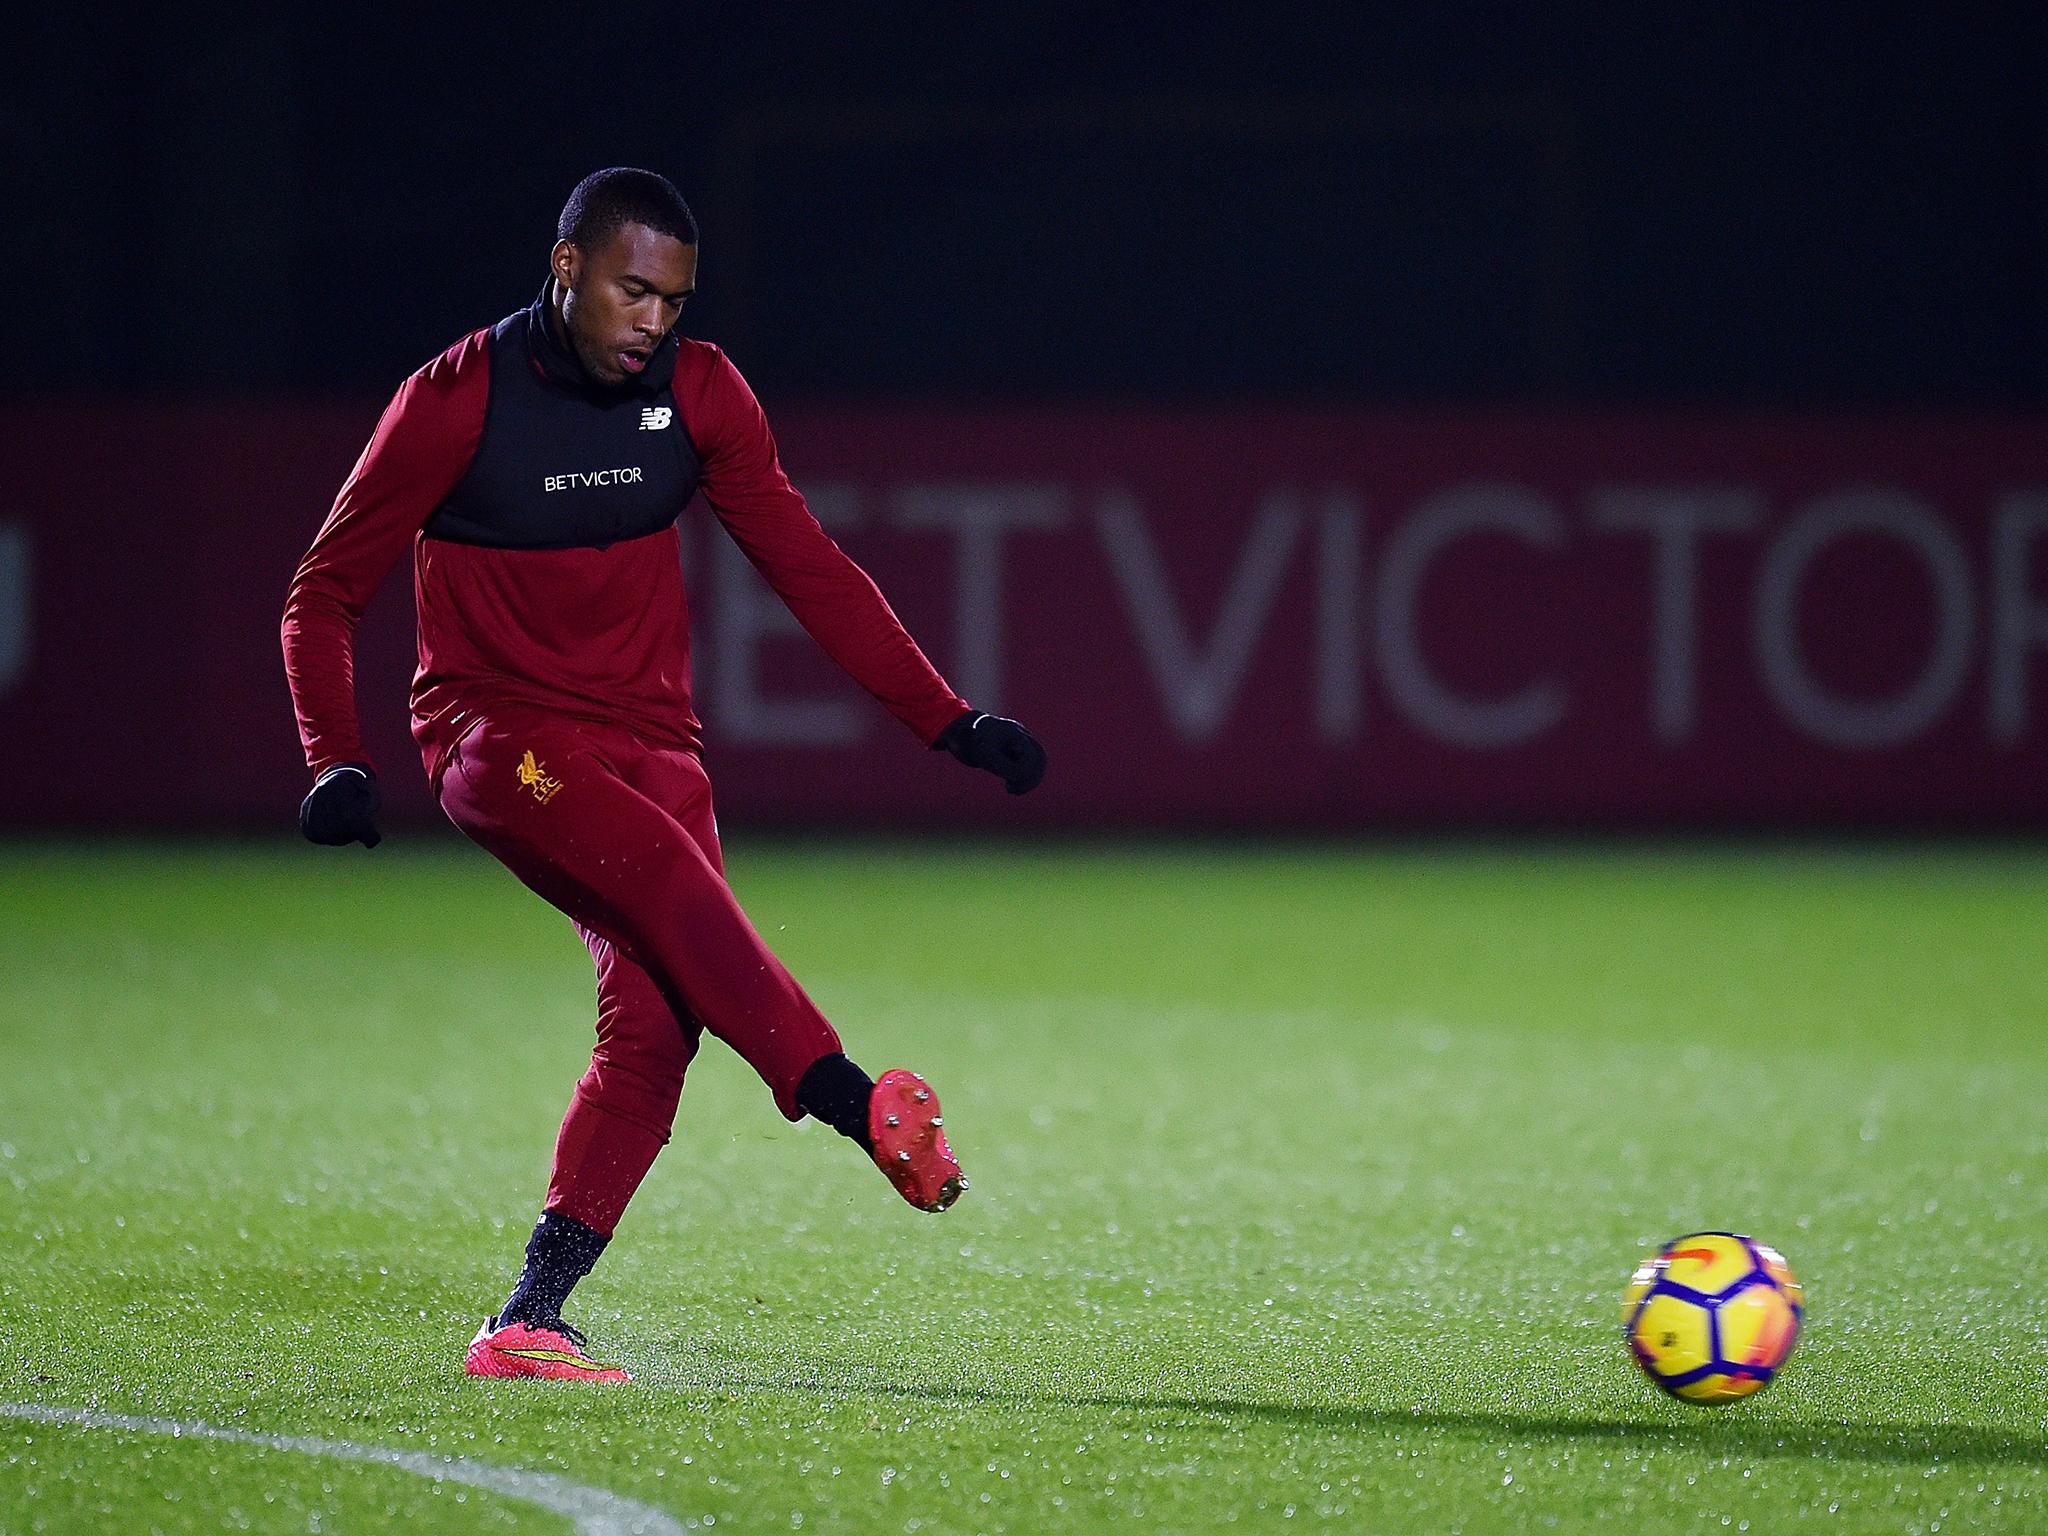 Daniel Sturridge is set for another spell on the sidelines with a muscular injury